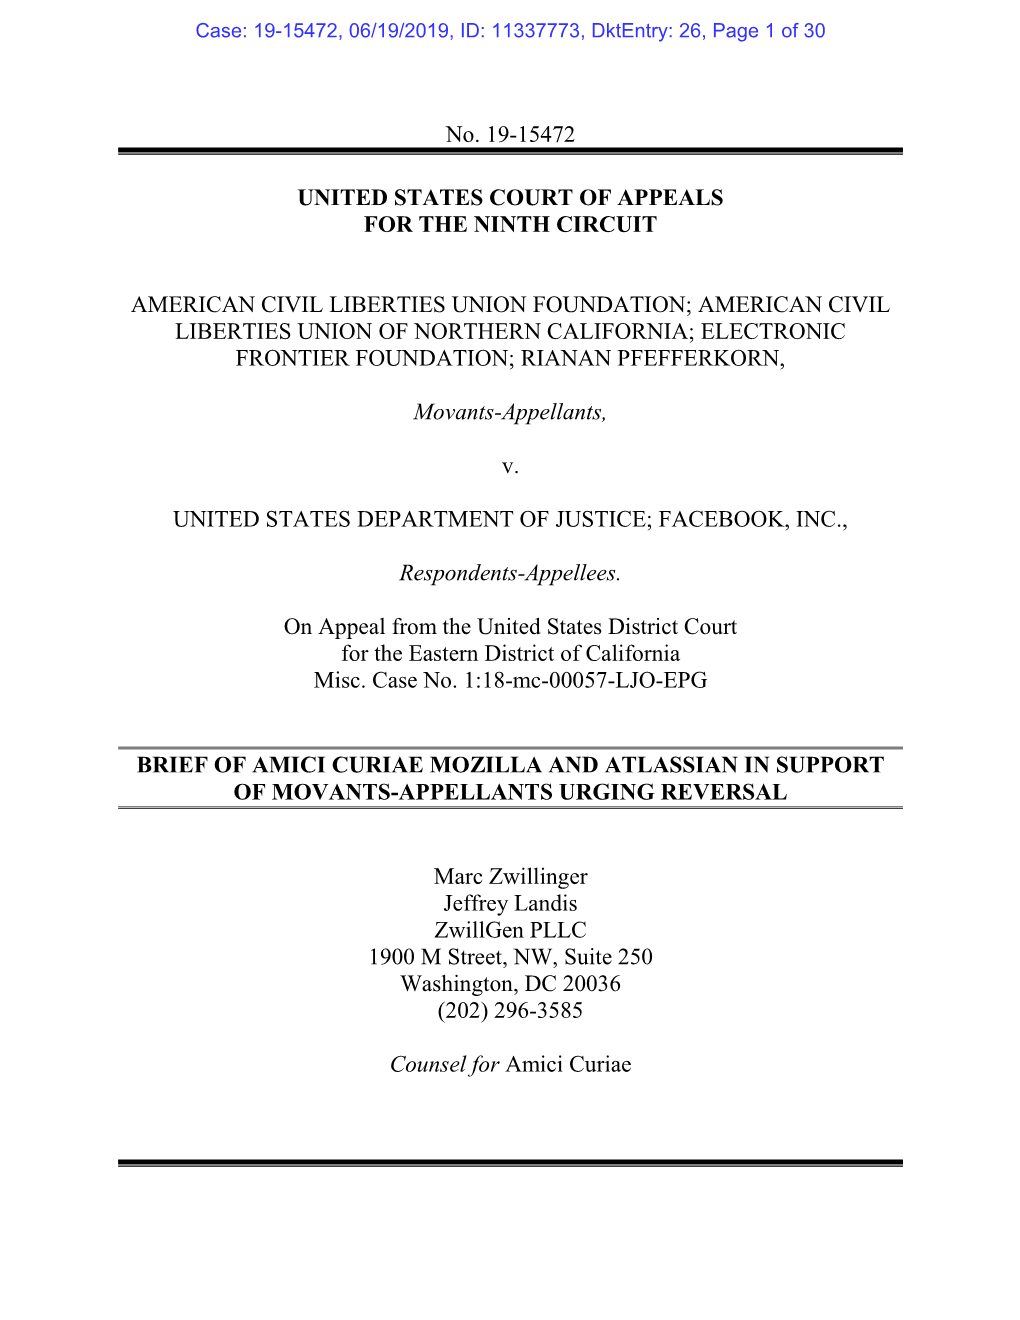 No. 19-15472 UNITED STATES COURT of APPEALS for THE